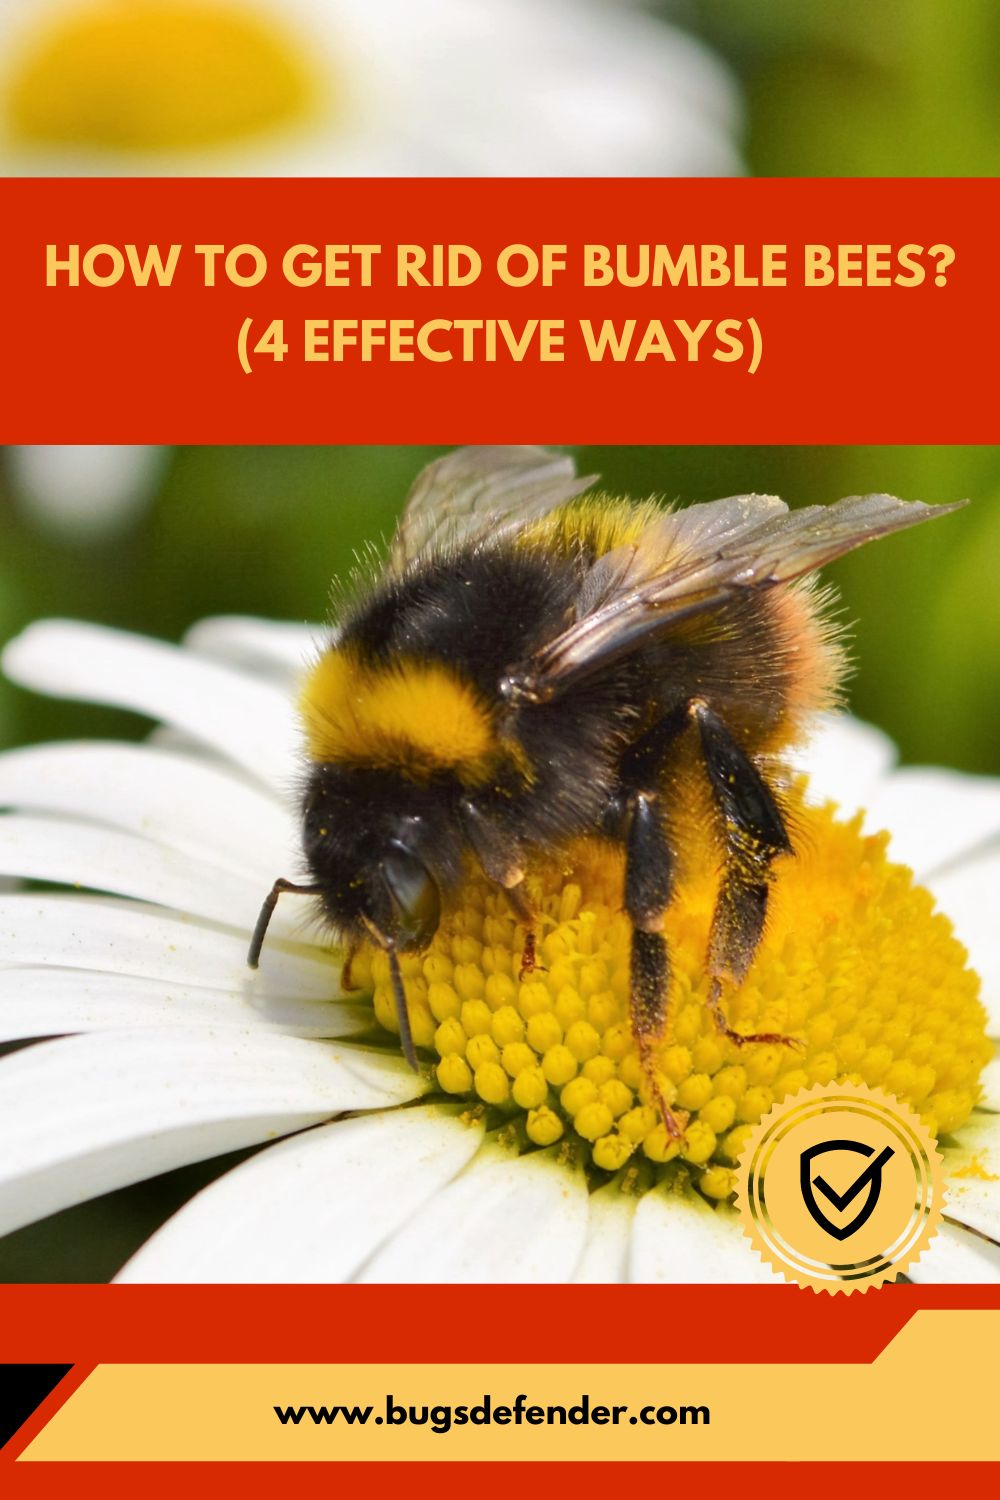 How To Get Rid Of Bumble Bees (4 Effective Ways) pin1